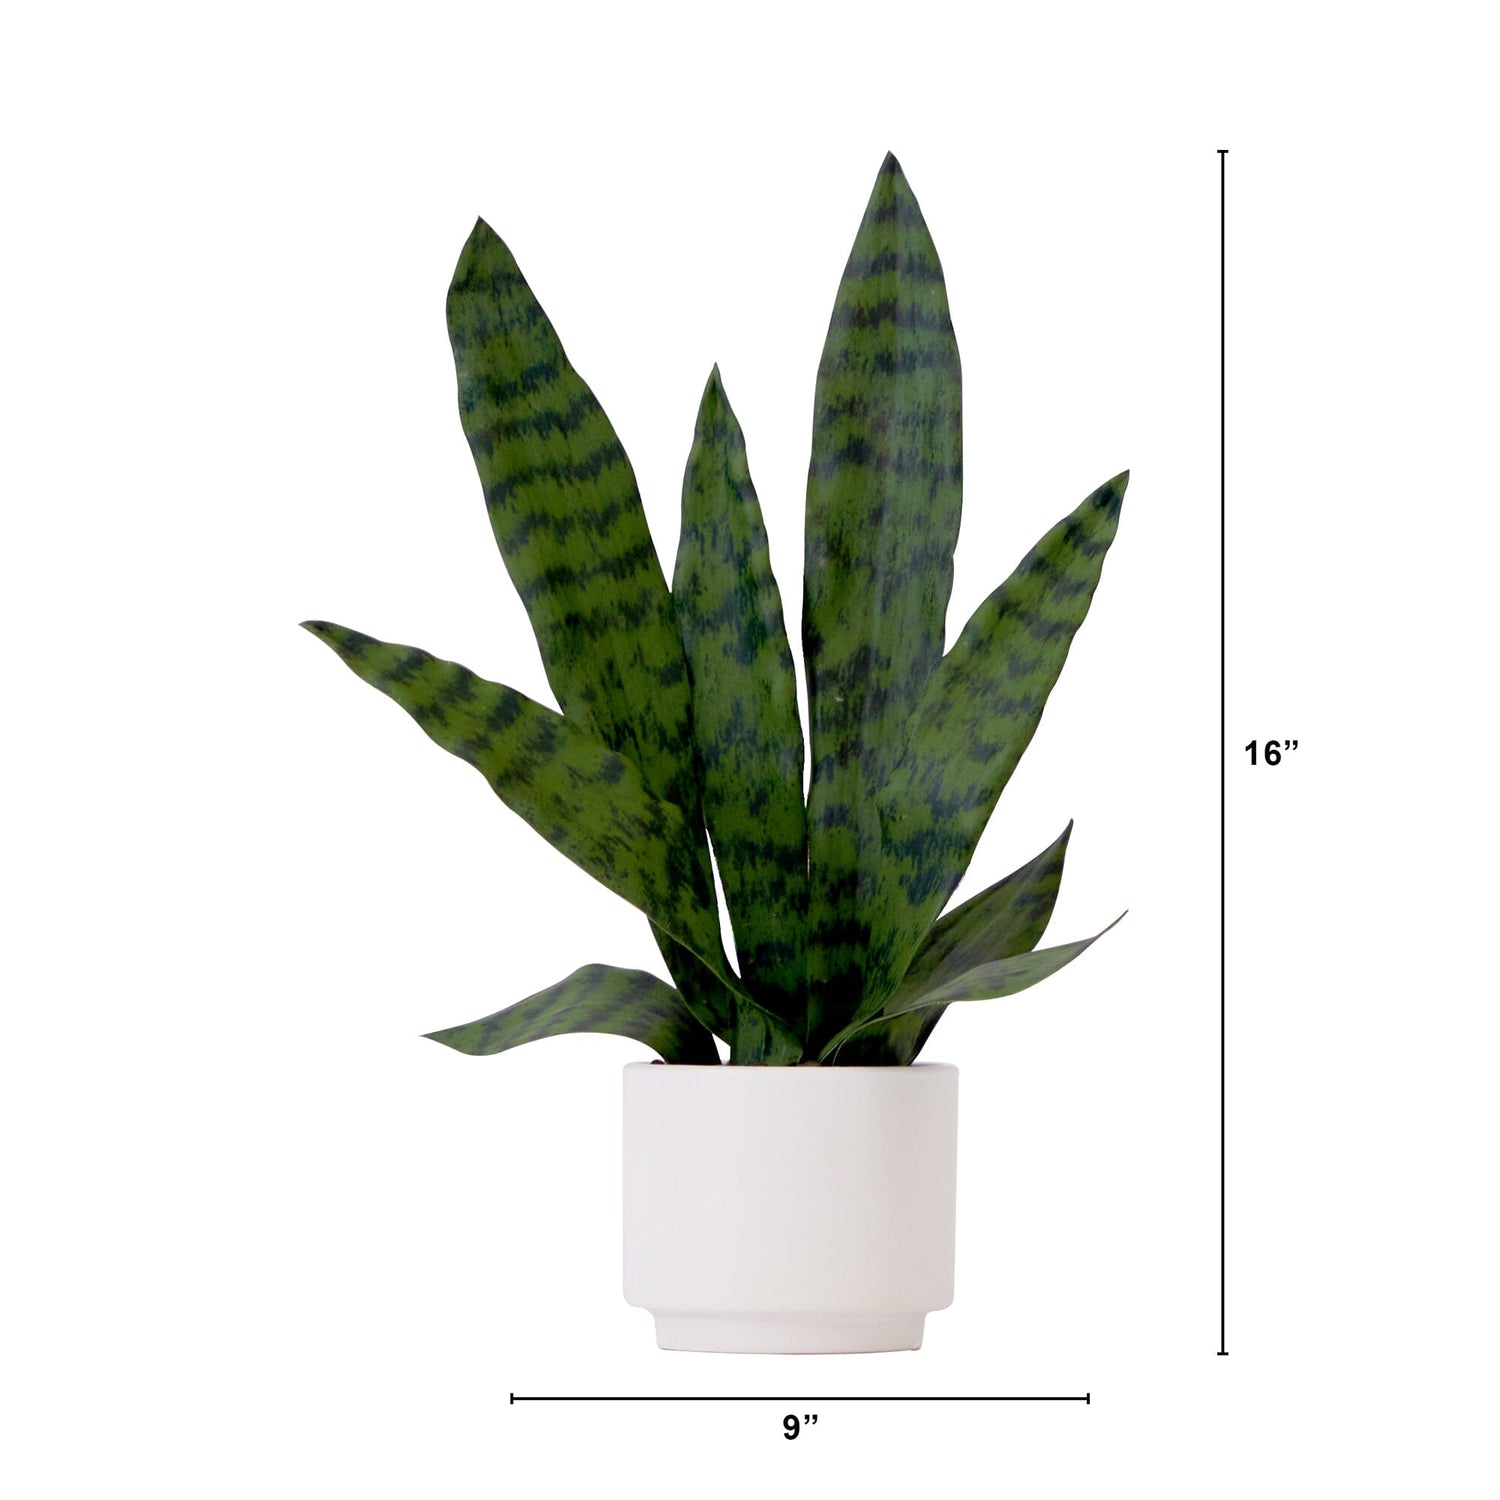 DUZYXI Artificial Snake Plant 16 with White Ceramic Pot Sansevieria Plant  Fake Snake Plant Greenery Faux Plant in Pot for Home Office Living Room